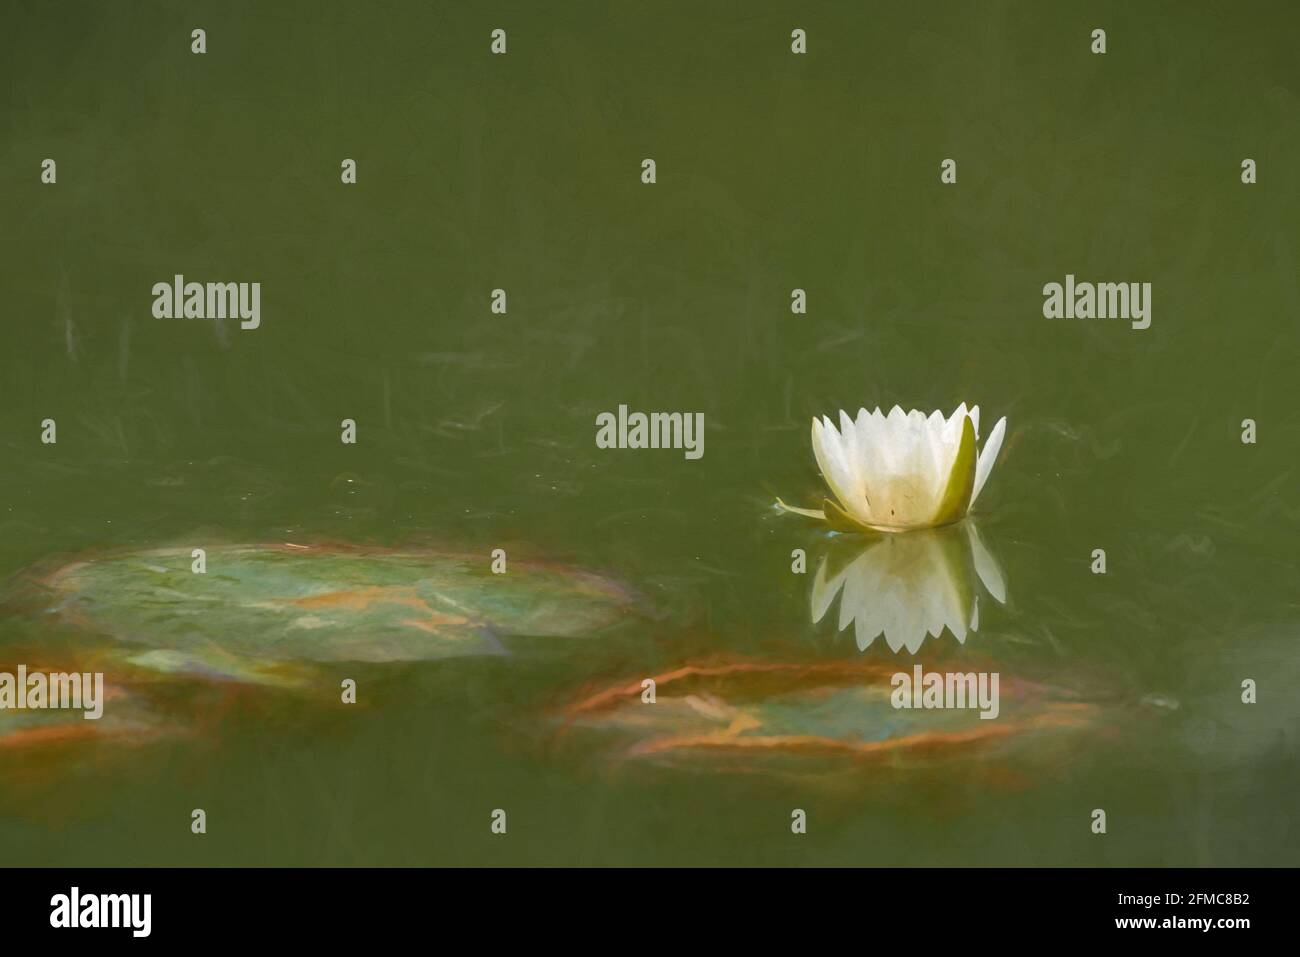 Digital painting of a white waterlily amongst green lily pads on a pond. Stock Photo